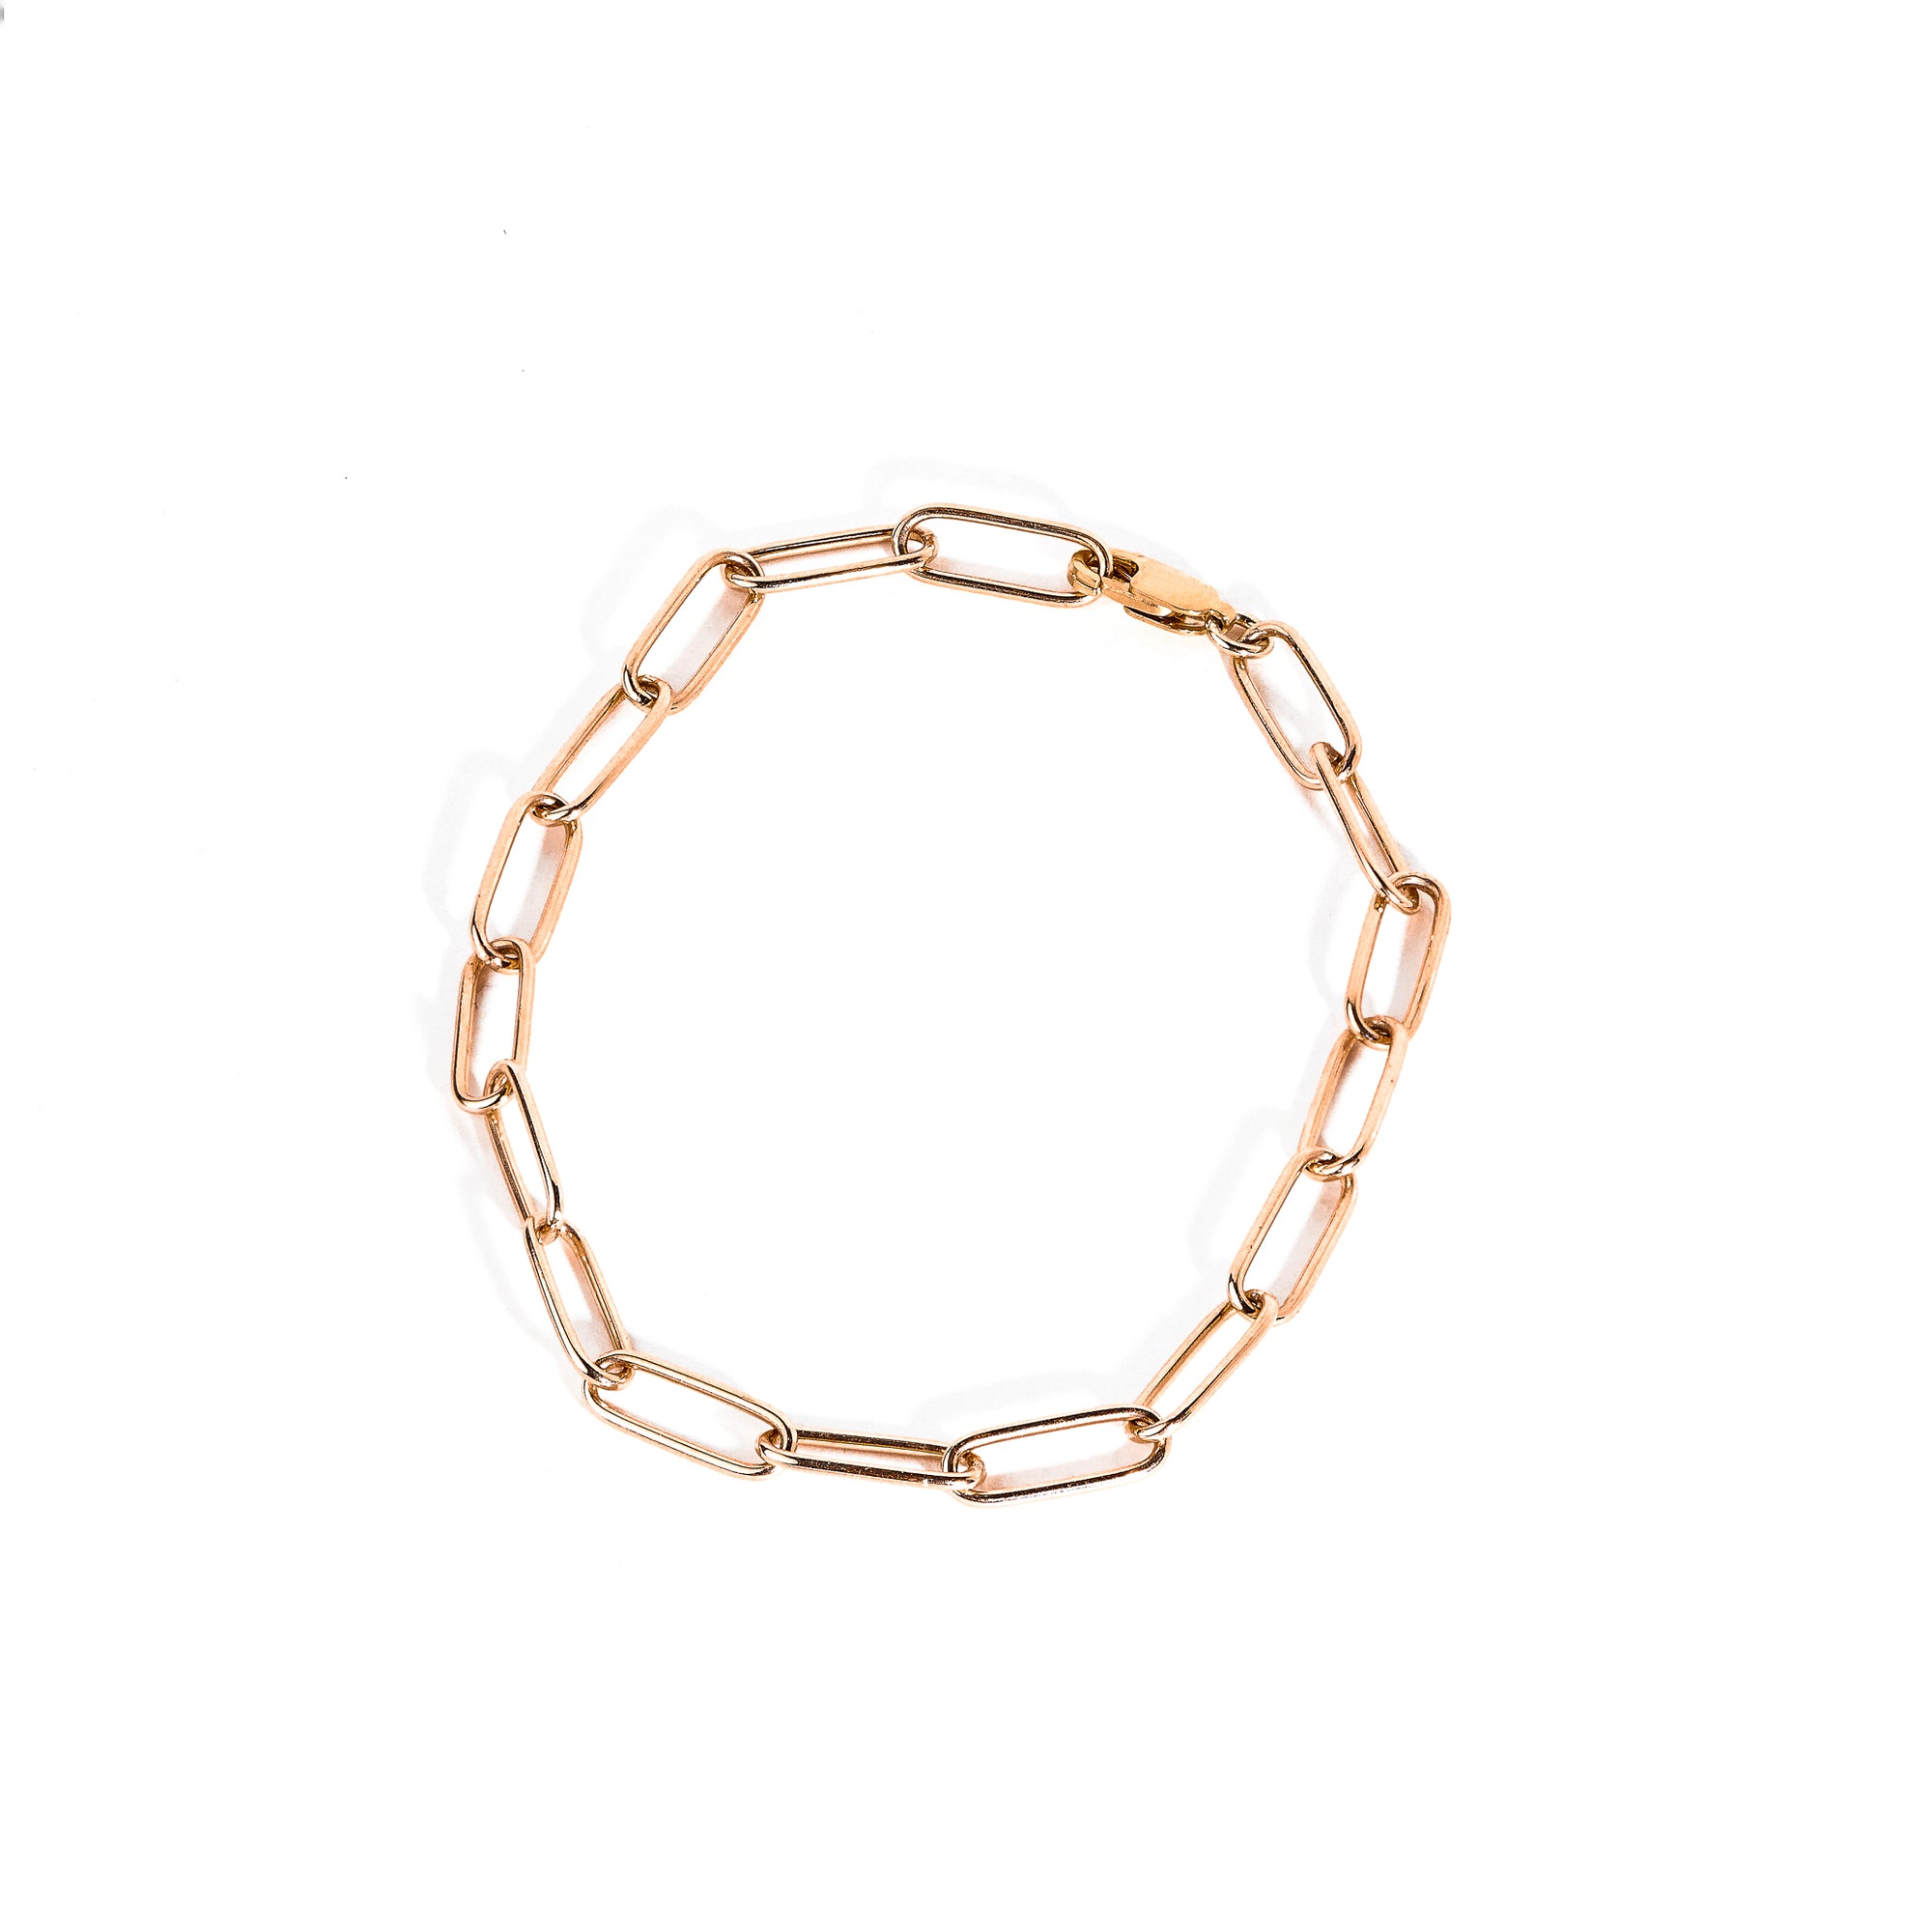 Small 'paperclip' style links in solid 9ct rose gold